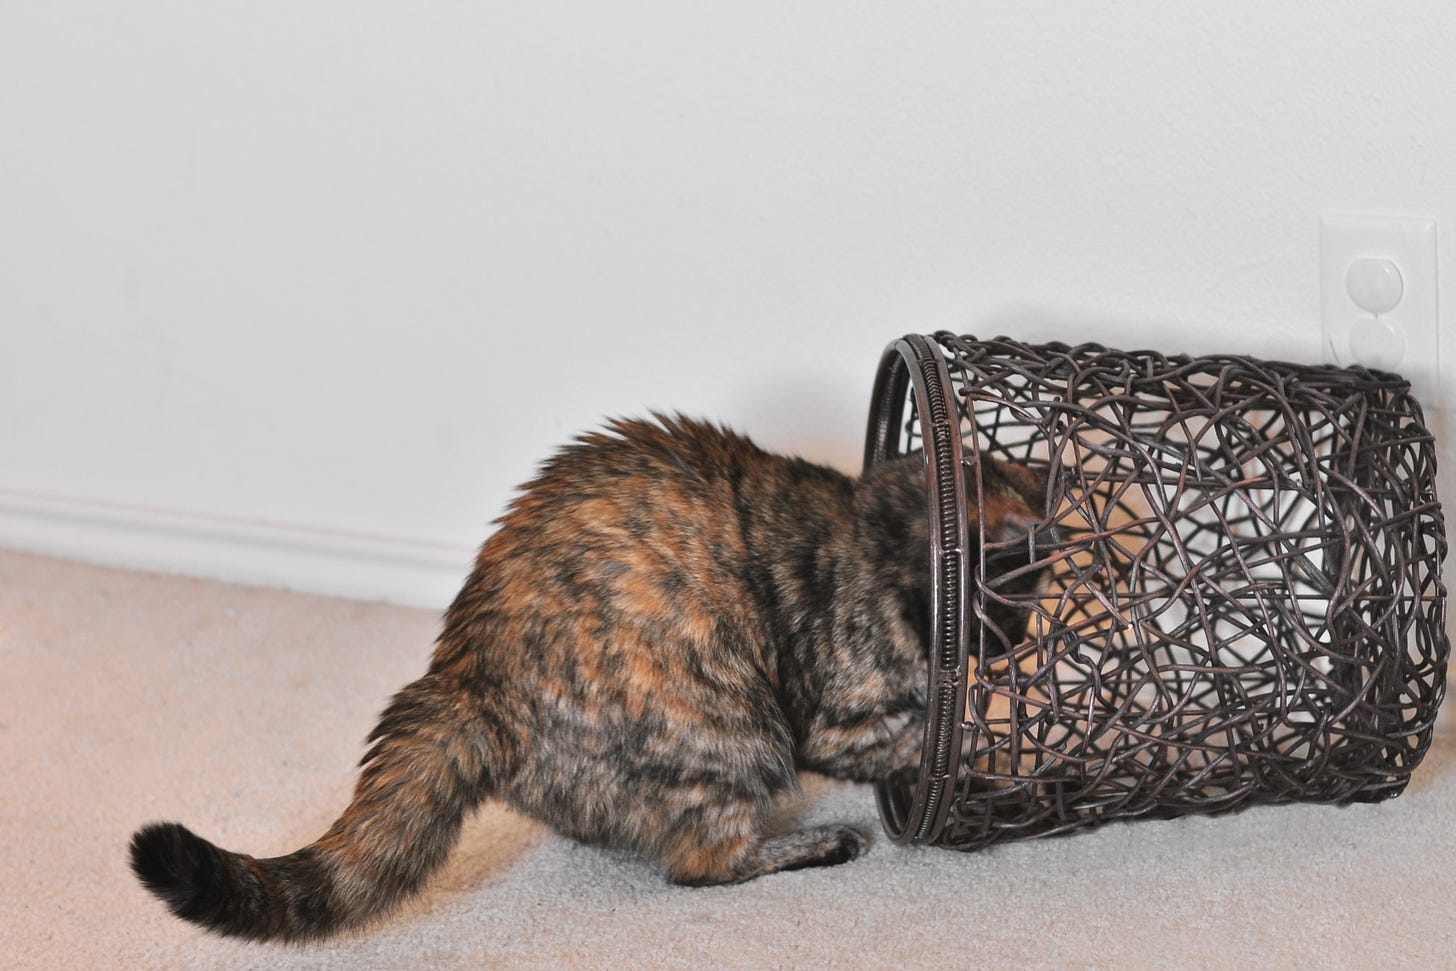 A cat plays in a wastebasket.